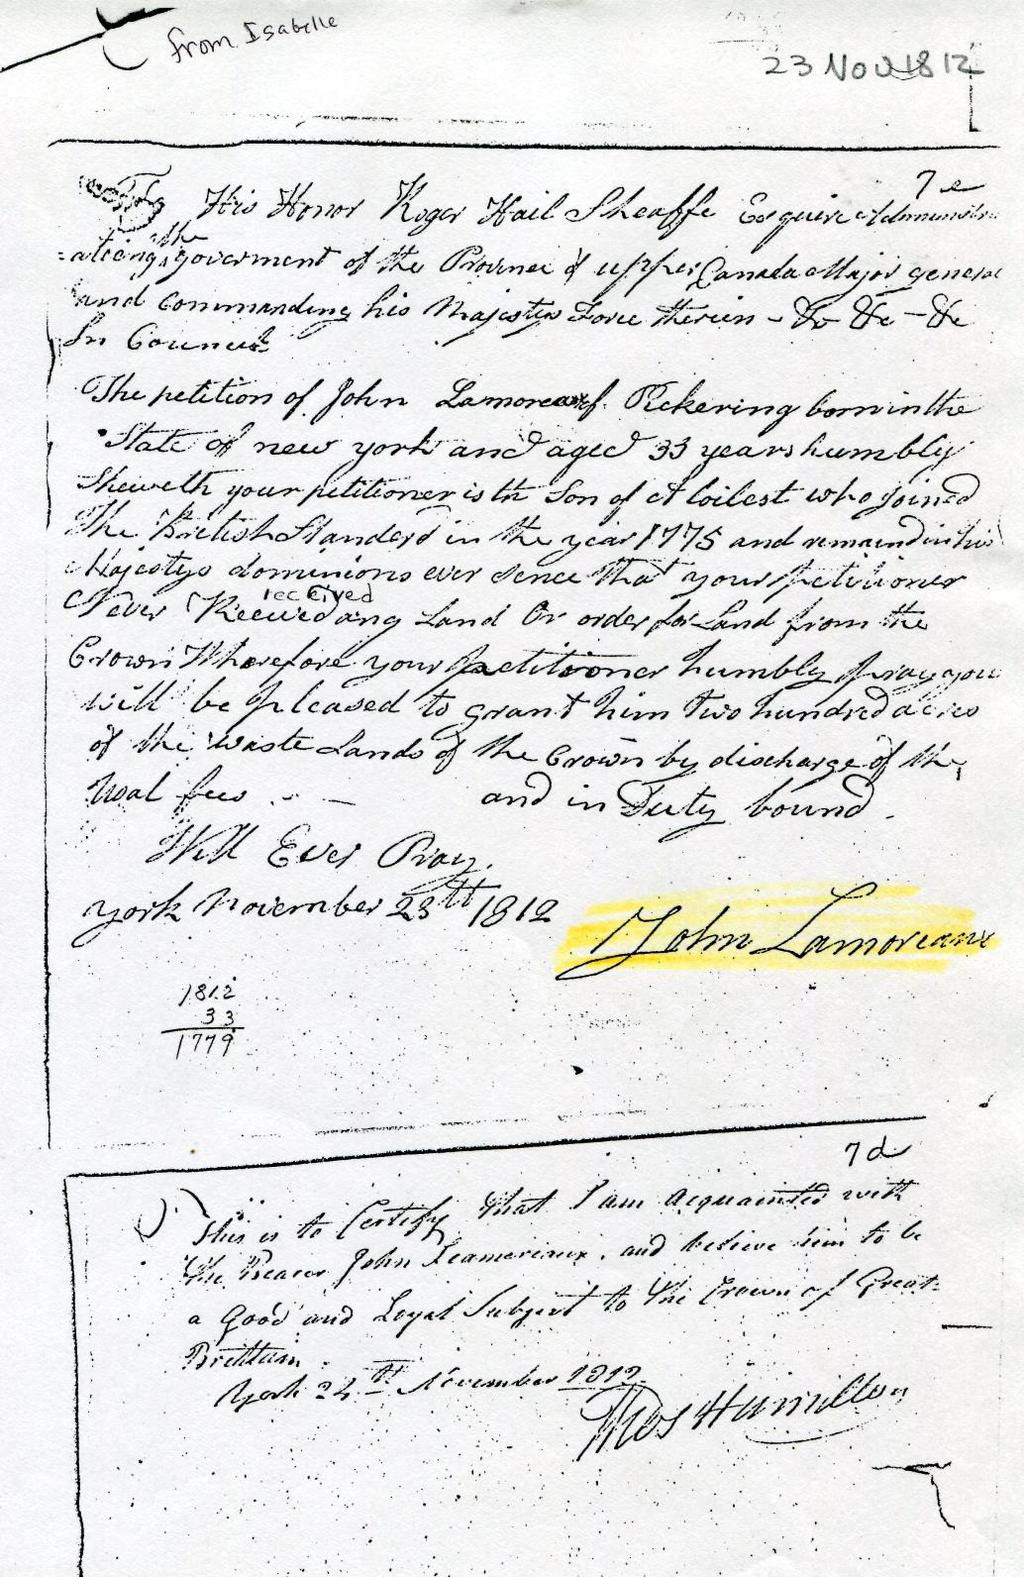 1812 Nov 23 - Scarborough a Memorial asking for land in Upper Canada, - 1 page - - [John says he is 33 years -